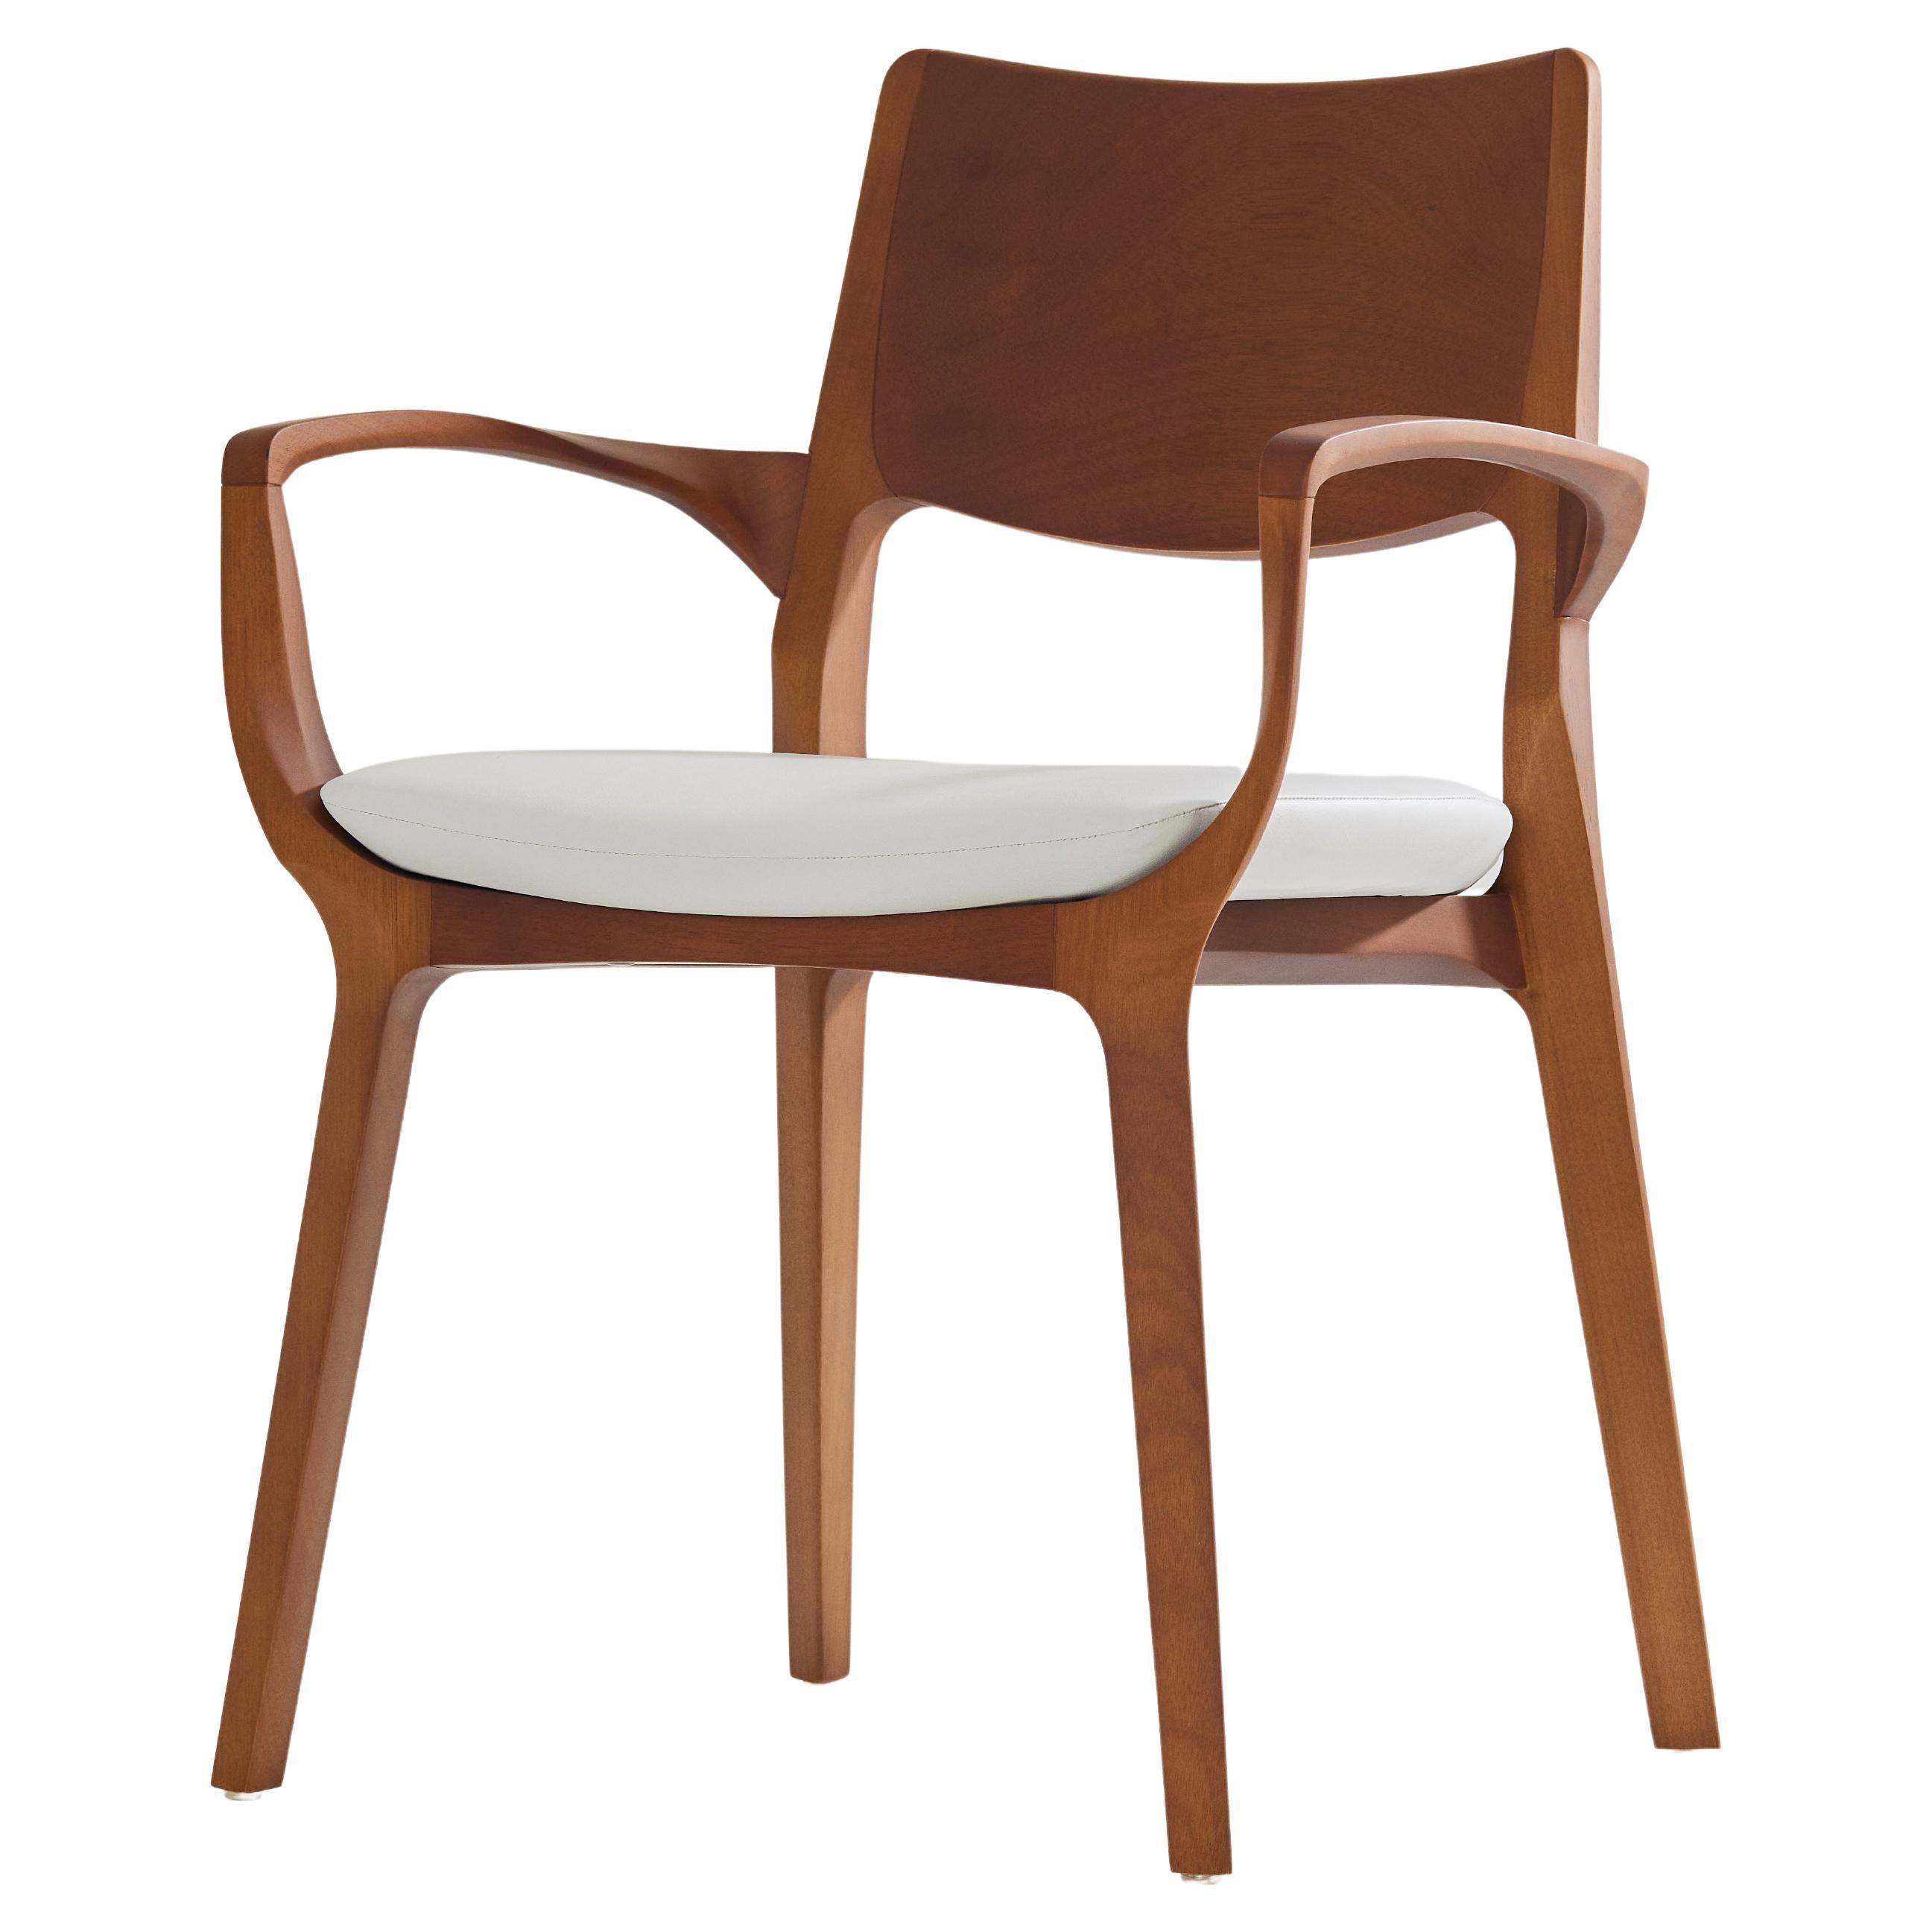 Post-Modern Style Aurora Chair in honey solid wood, vegan leather seating For Sale